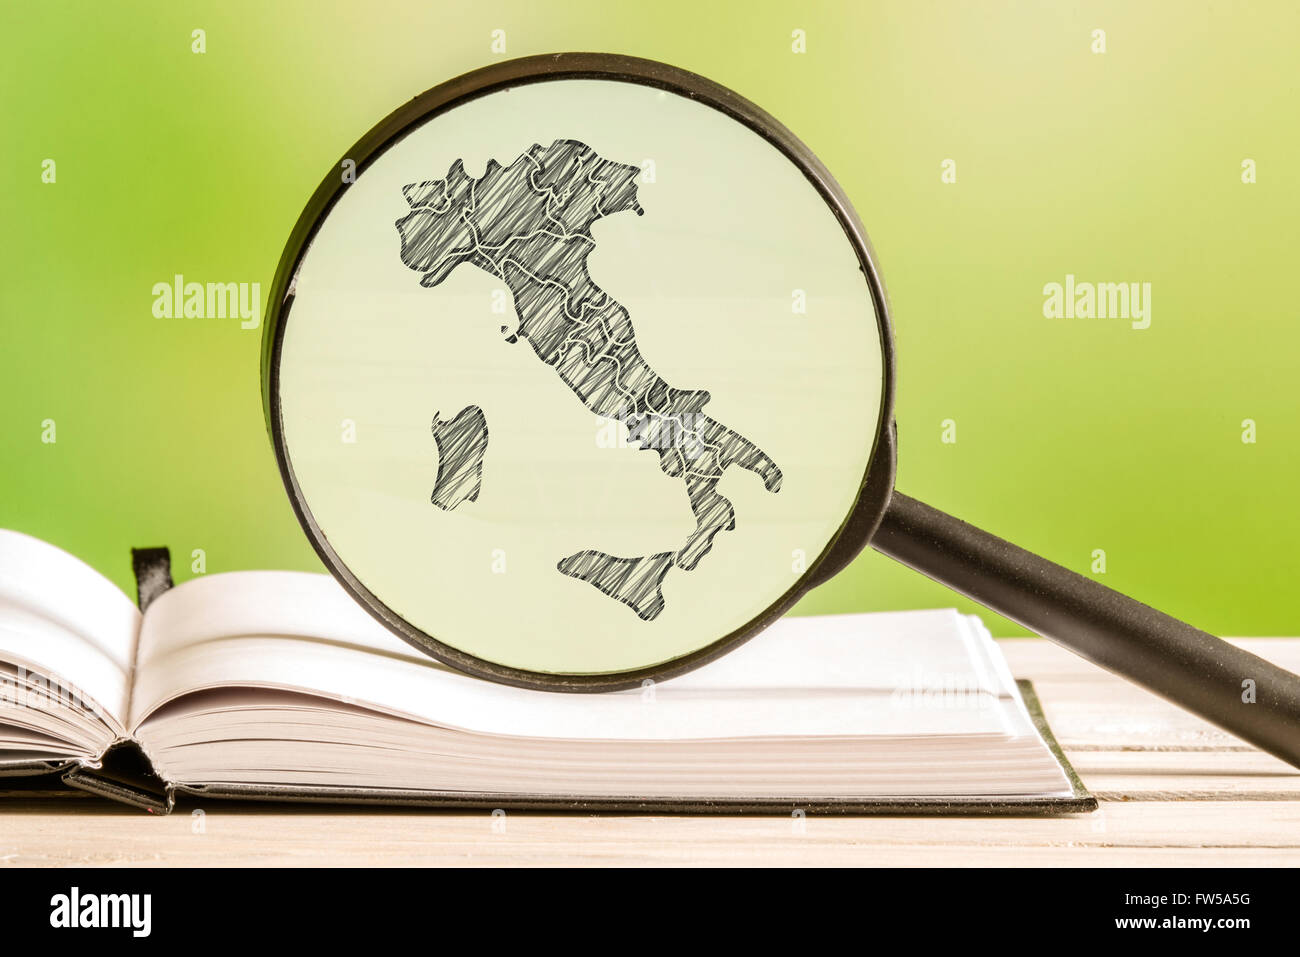 Italy With A Pencil Drawing Of A Italian Map In A Magnifying